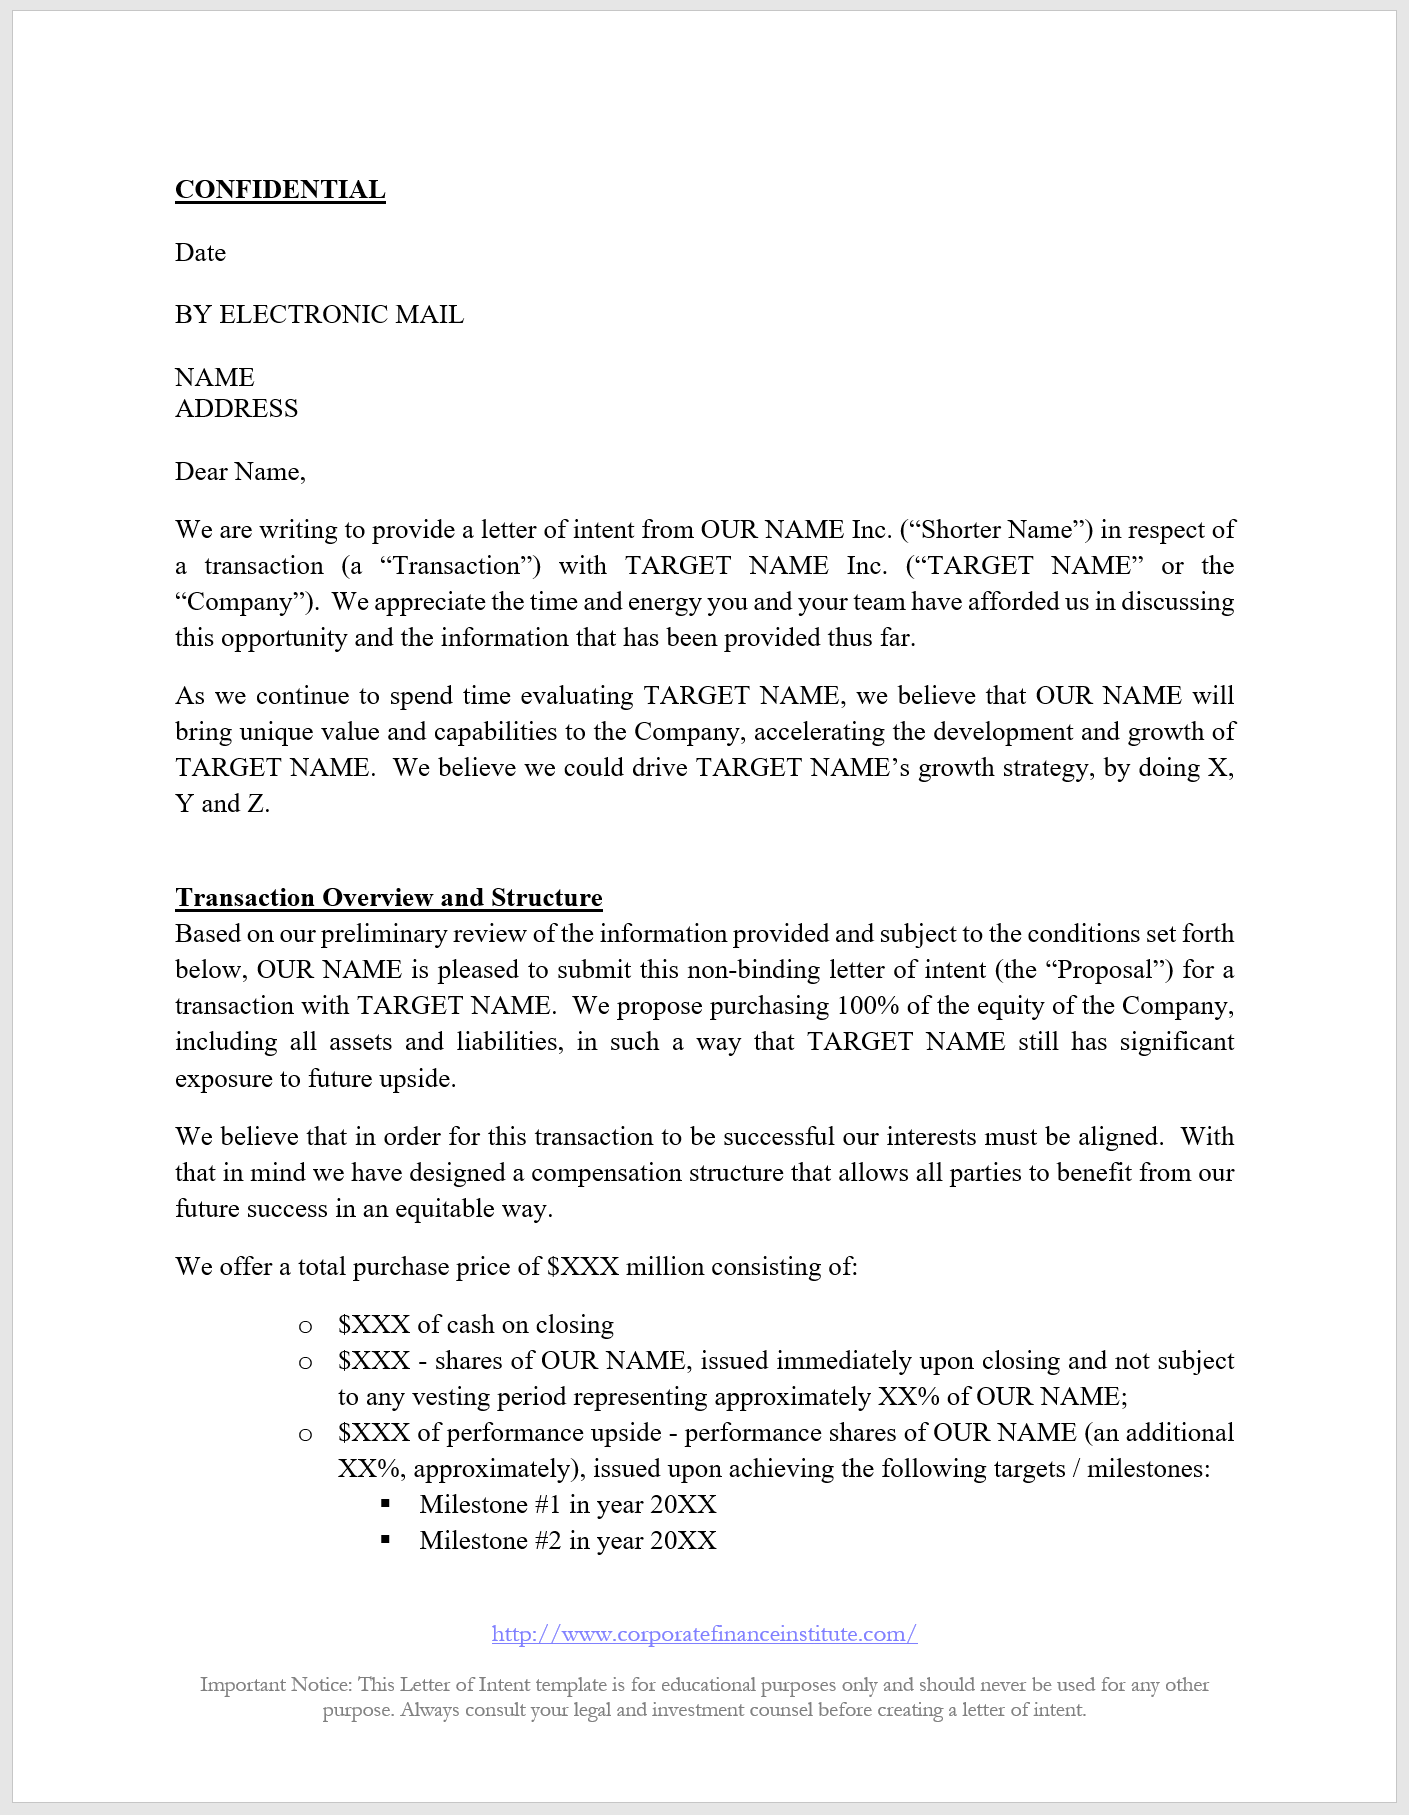 Proof Of Funds Letter Sample from corporatefinanceinstitute.com